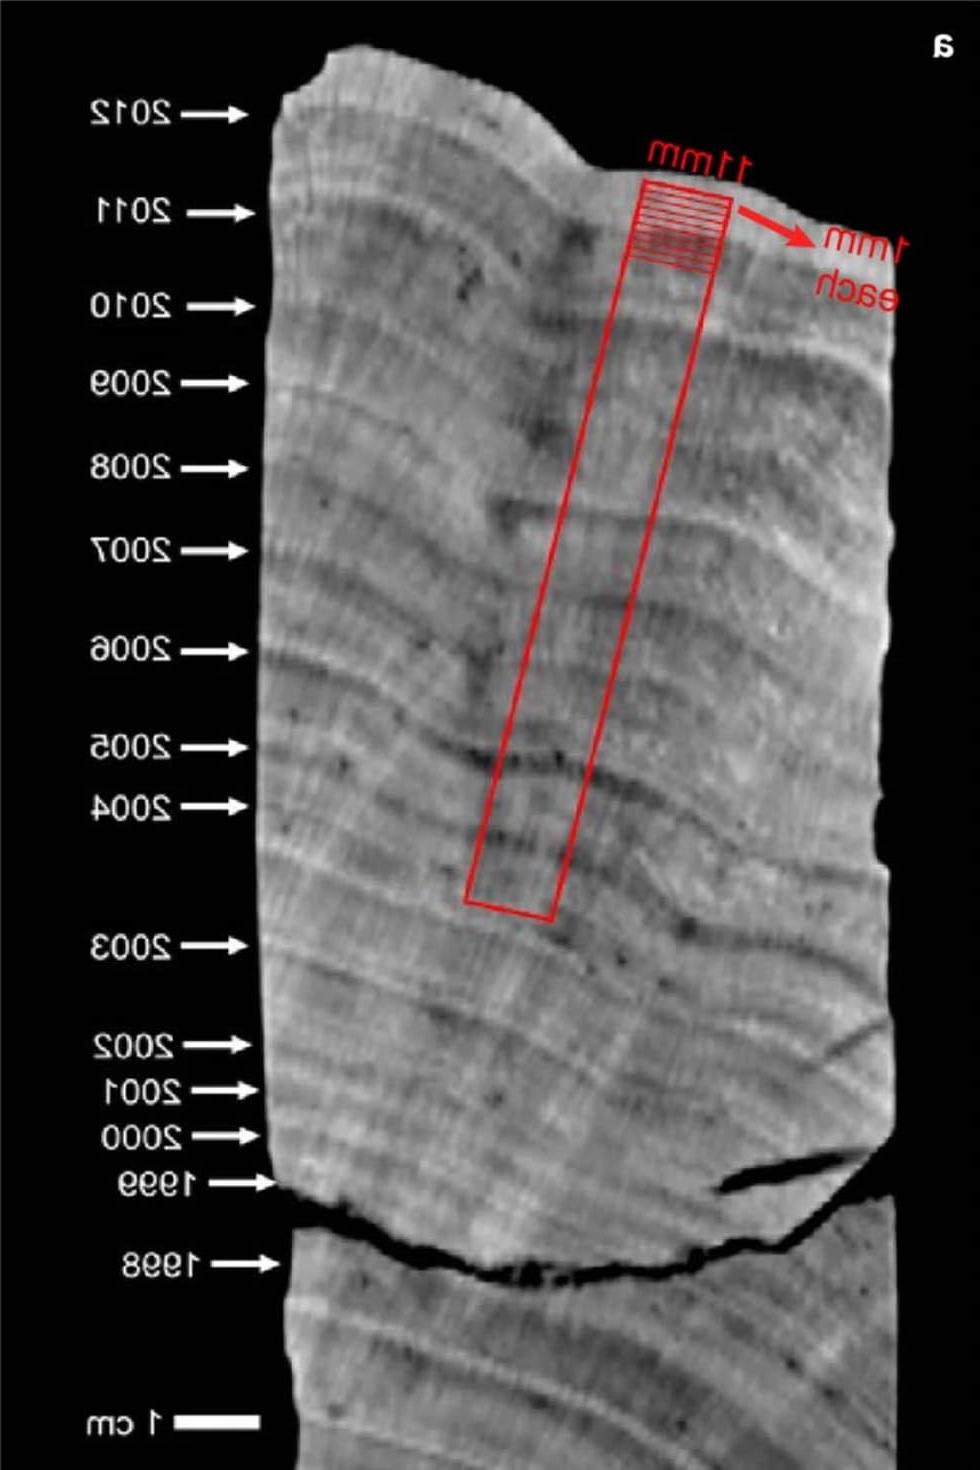 x-ray image of the coral sample used in the study.